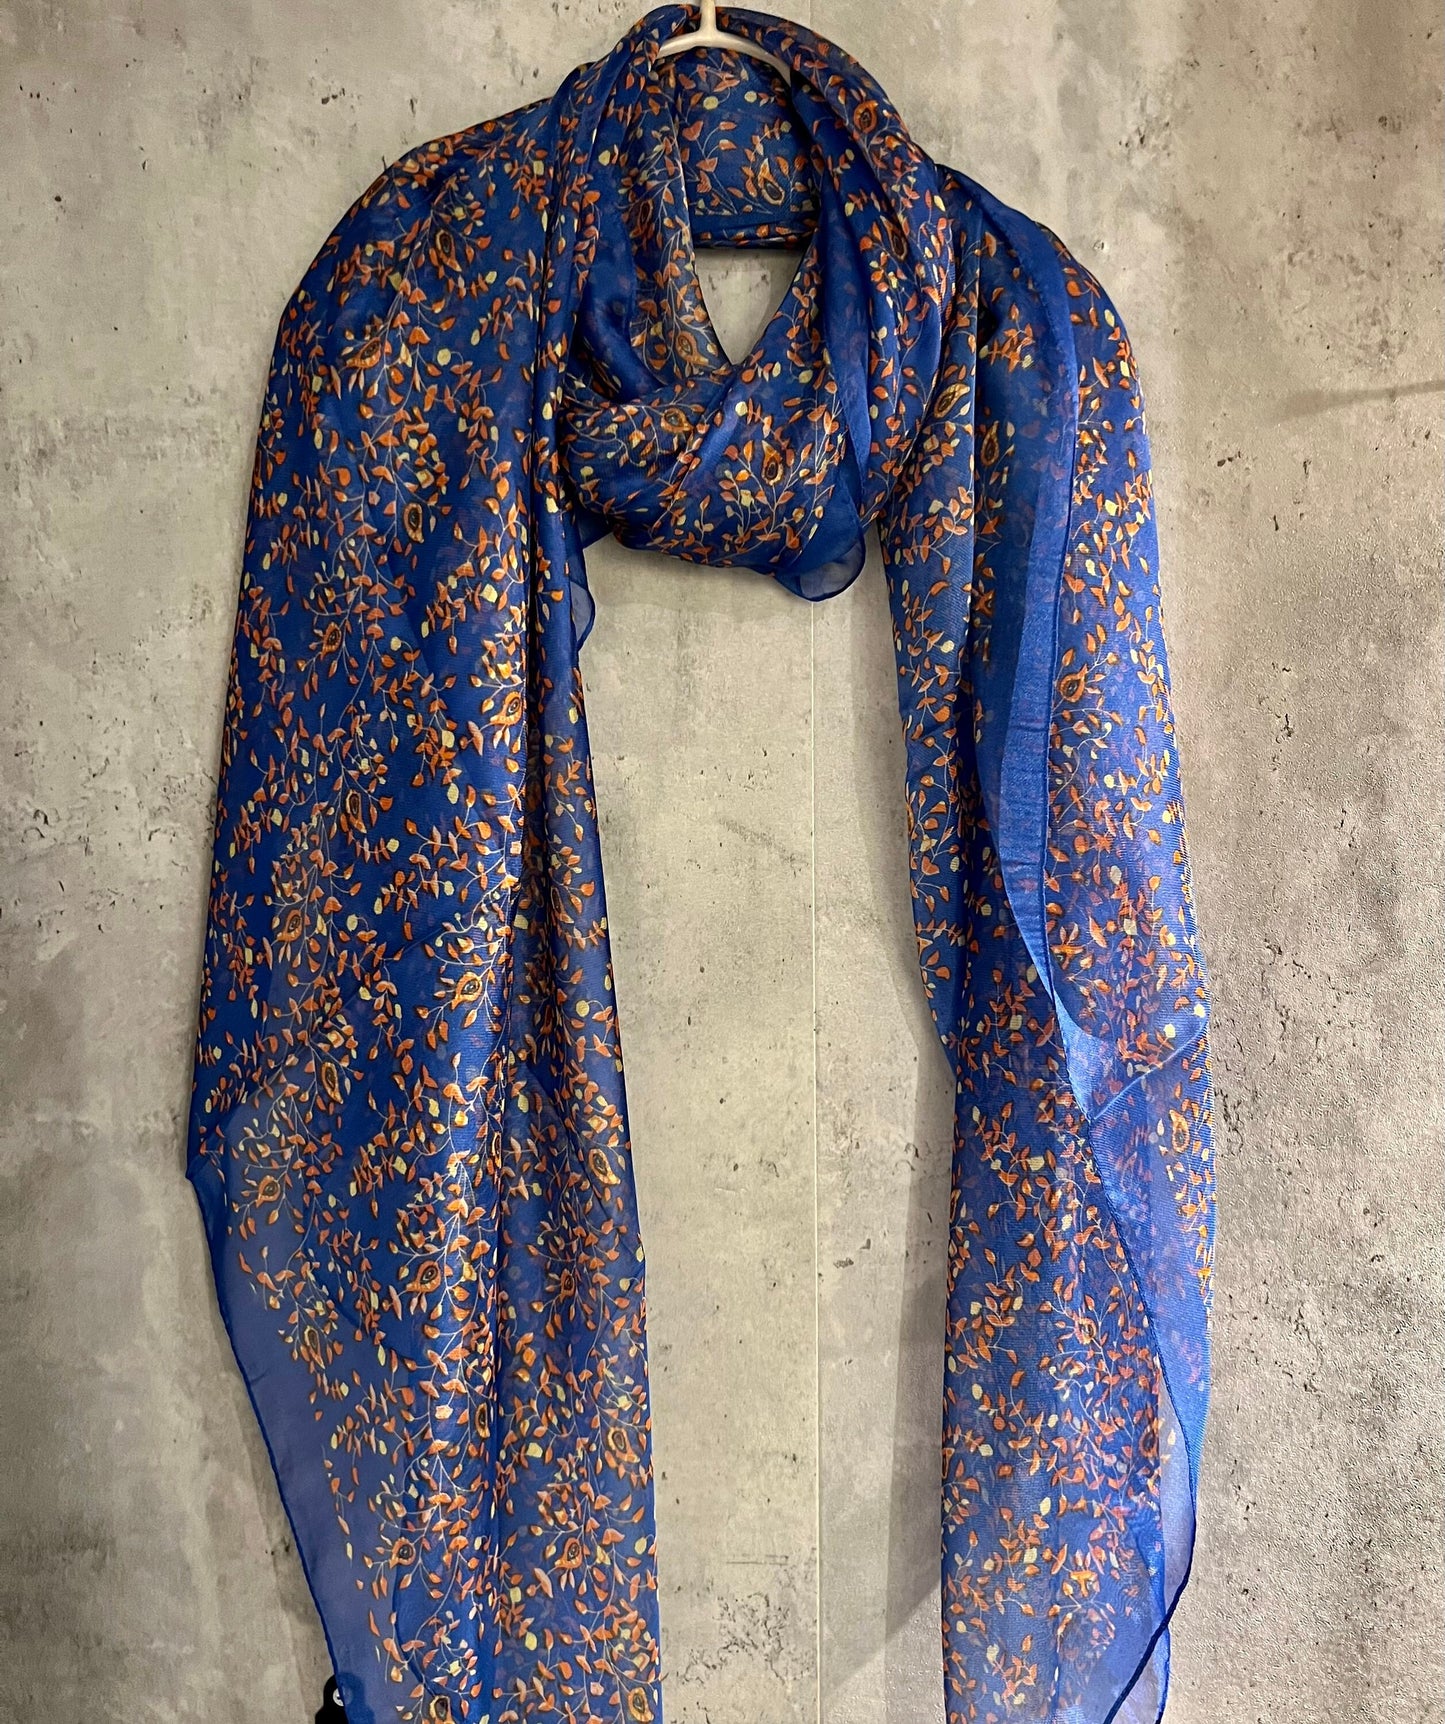 Small Leaves Pattern Blue Silk Scarf/Spring Summer Autumn Scarf/Gifts For Her Birthday/Gifts For Mum/Christmas/Scarf Women/UK Seller